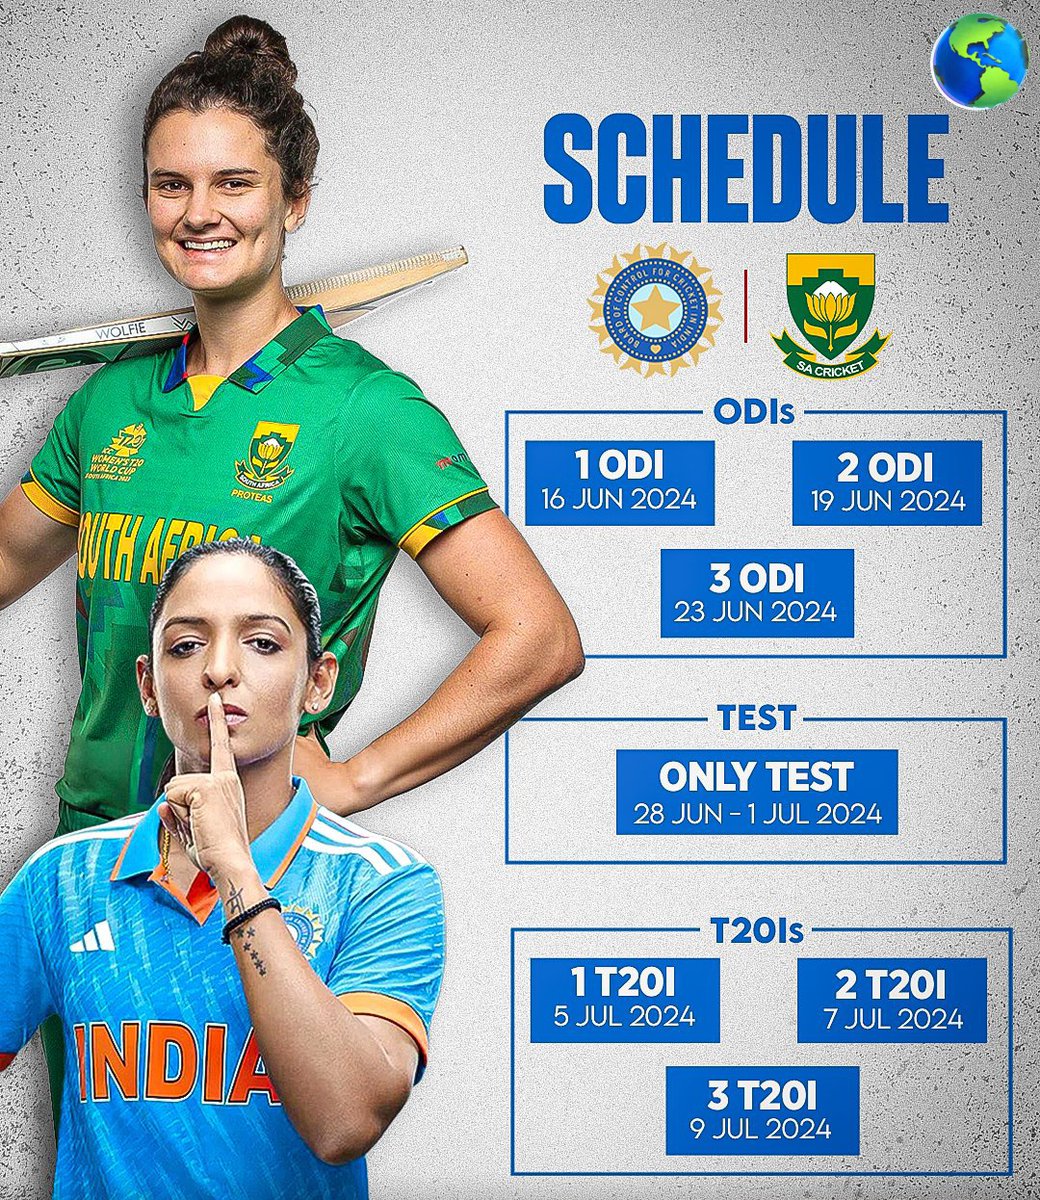 #ICYMI 
Here's the schedule for India's next assignment against South Africa. 💪 
• ODIs - Bengaluru
• Test and T20Is - Chennai
   #INDvSA